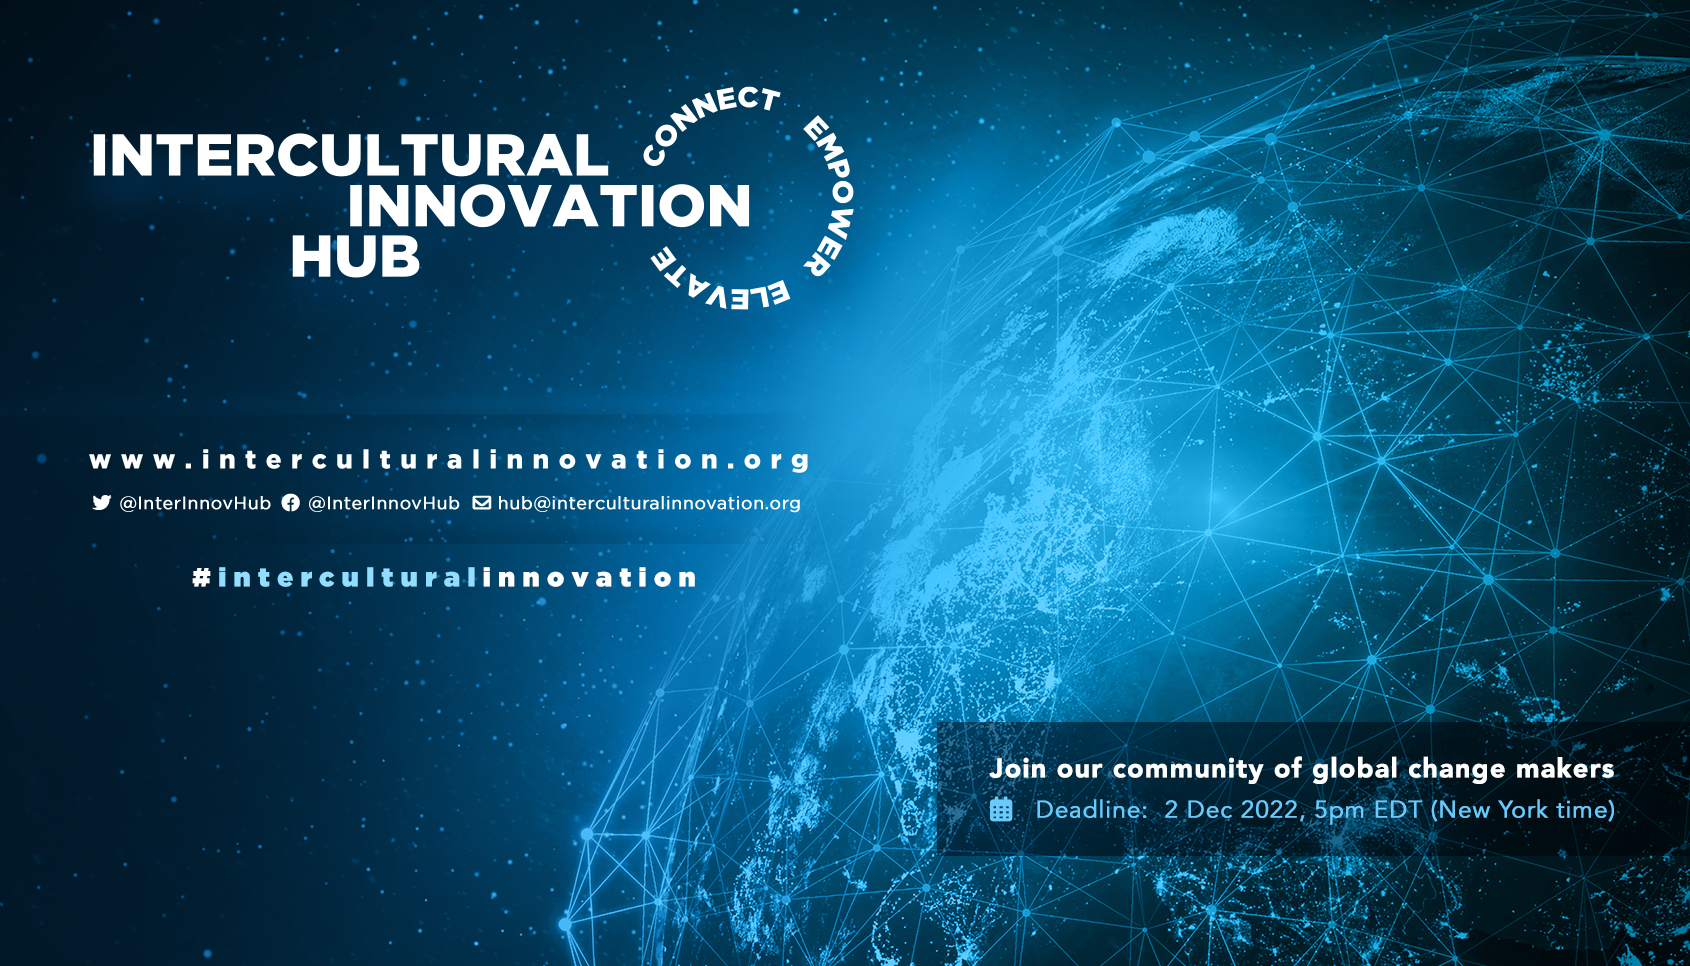 Intercultural Innovation Hub: Calling projects promoting an inclusive and diverse society